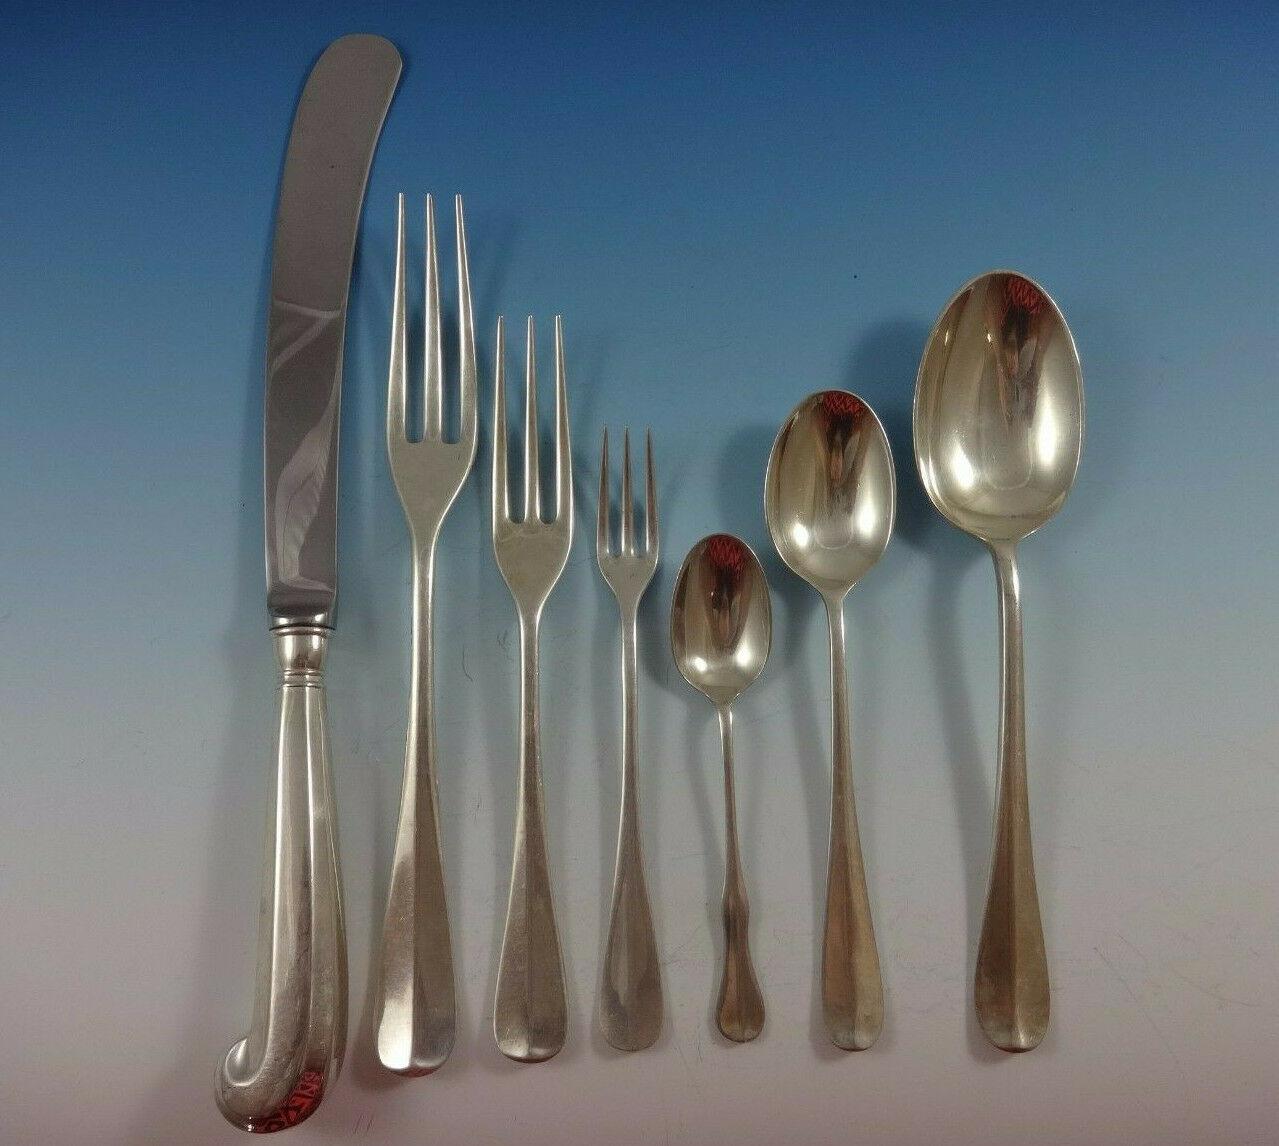 Queen Anne Williamsburg by Stieff sterling silver flatware set, 89 pieces. This set includes:

12 dinner knives, 9 1/4